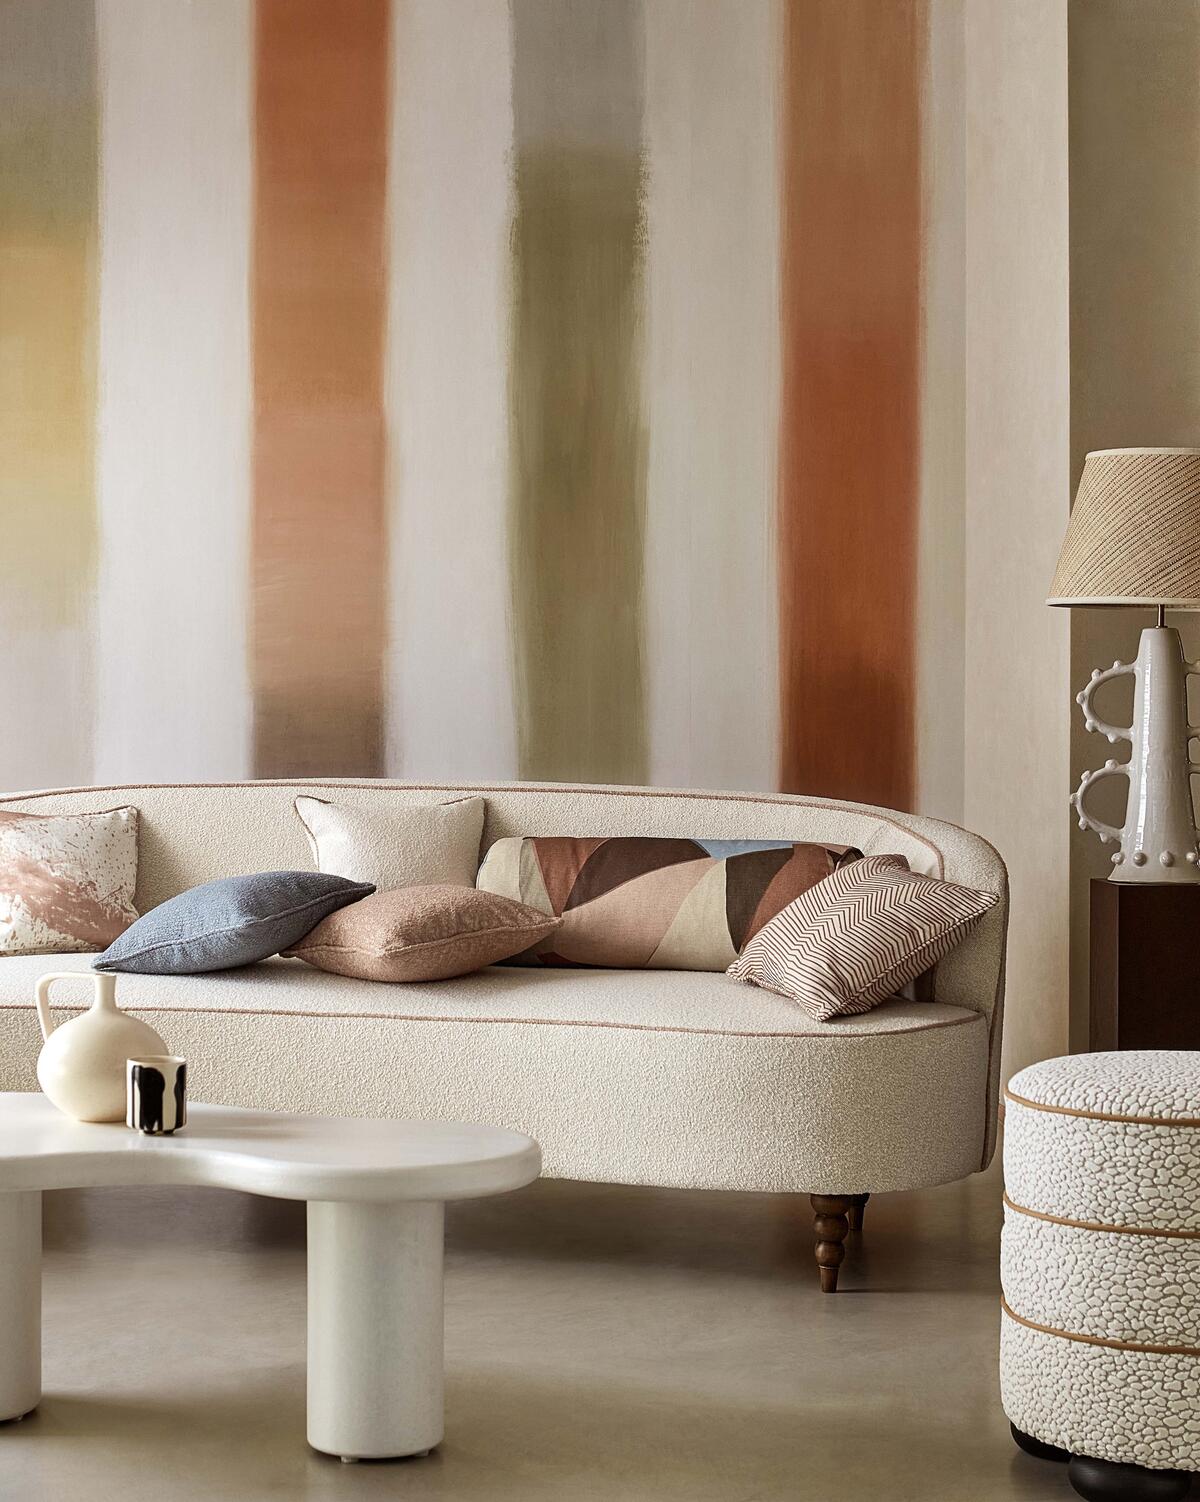 13 ways Harlequin’s Reflect collection curates colors for good